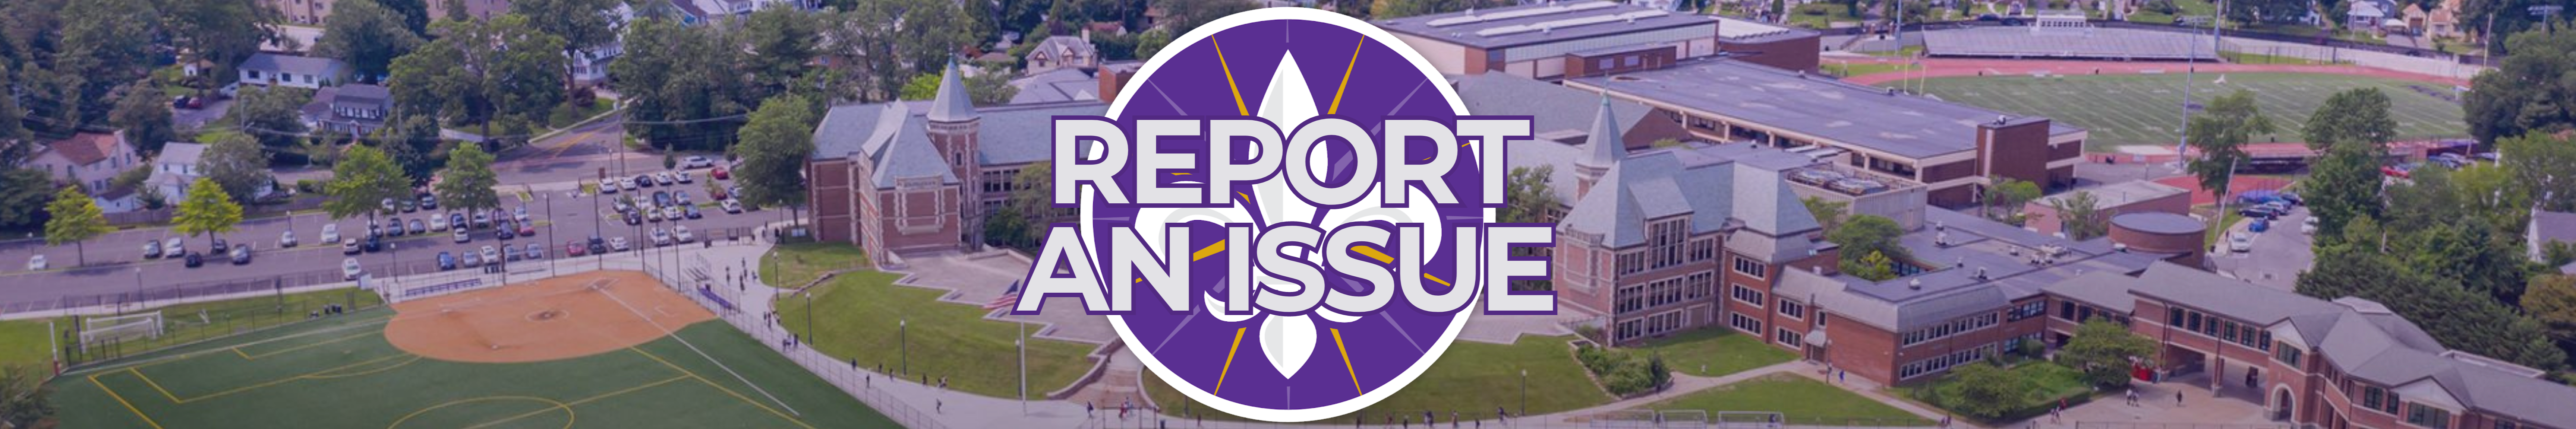 Report an Issue banner